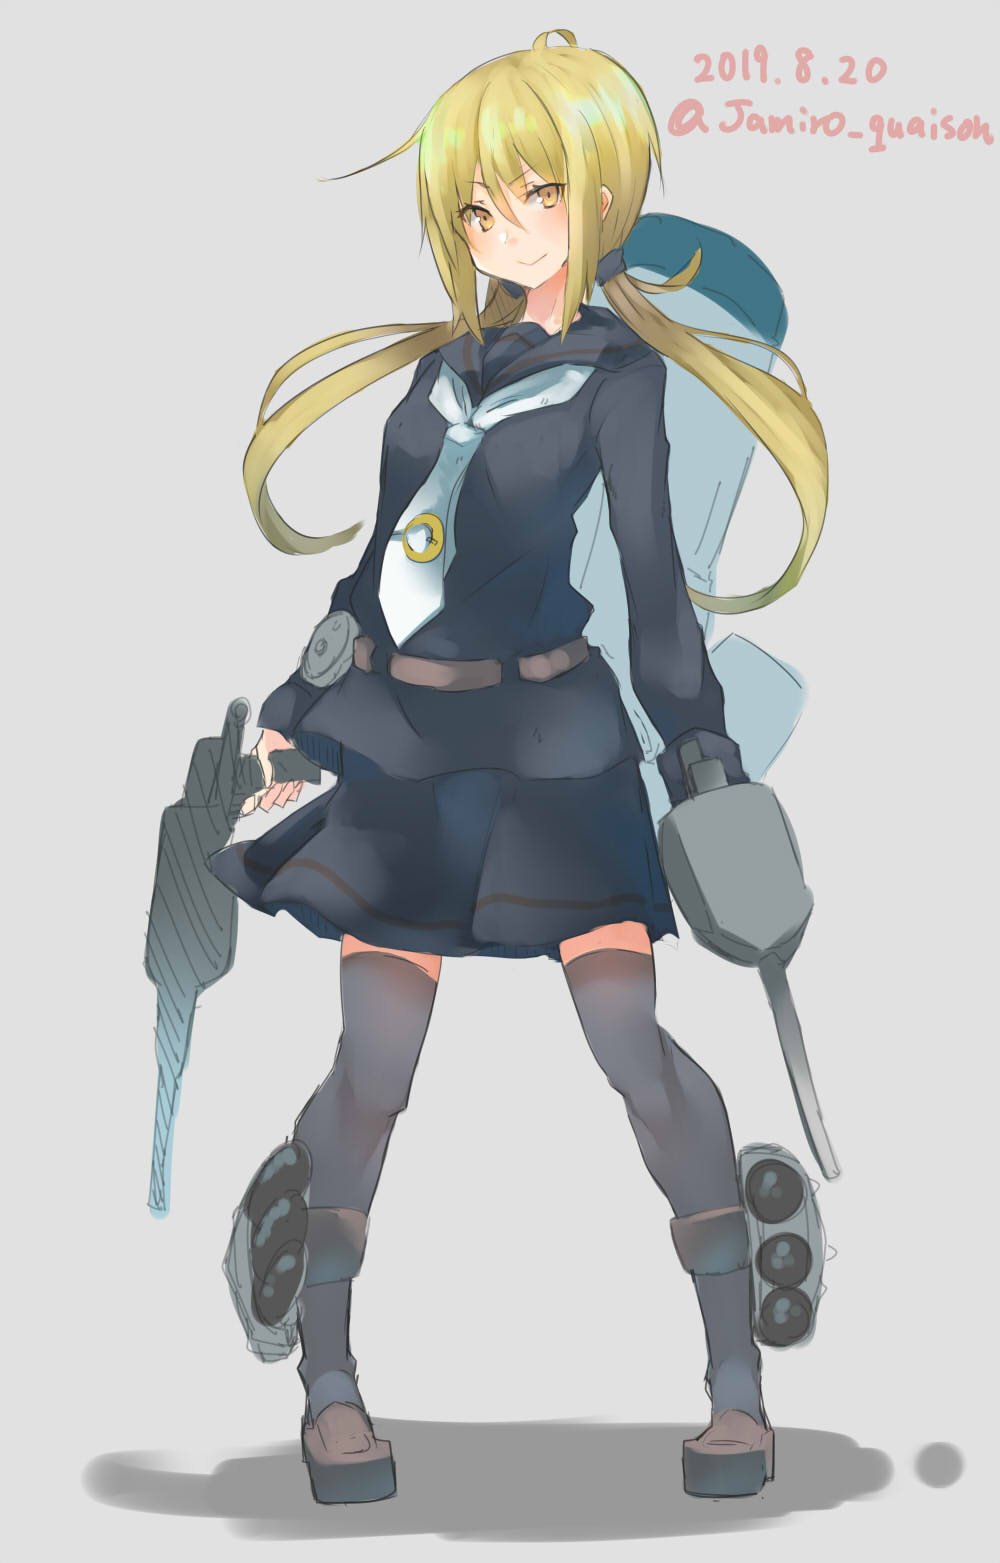 1girl adapted_turret black_legwear black_serafuku blonde_hair brown_footwear cannon commentary_request crescent crescent_moon_pin dated dual_wielding full_body grey_background highres holding jamiro_quaison kantai_collection loafers long_hair looking_at_viewer machinery necktie satsuki_(kantai_collection) school_uniform serafuku shoes simple_background smokestack solo standing thigh-highs turret twintails twitter_username white_neckwear